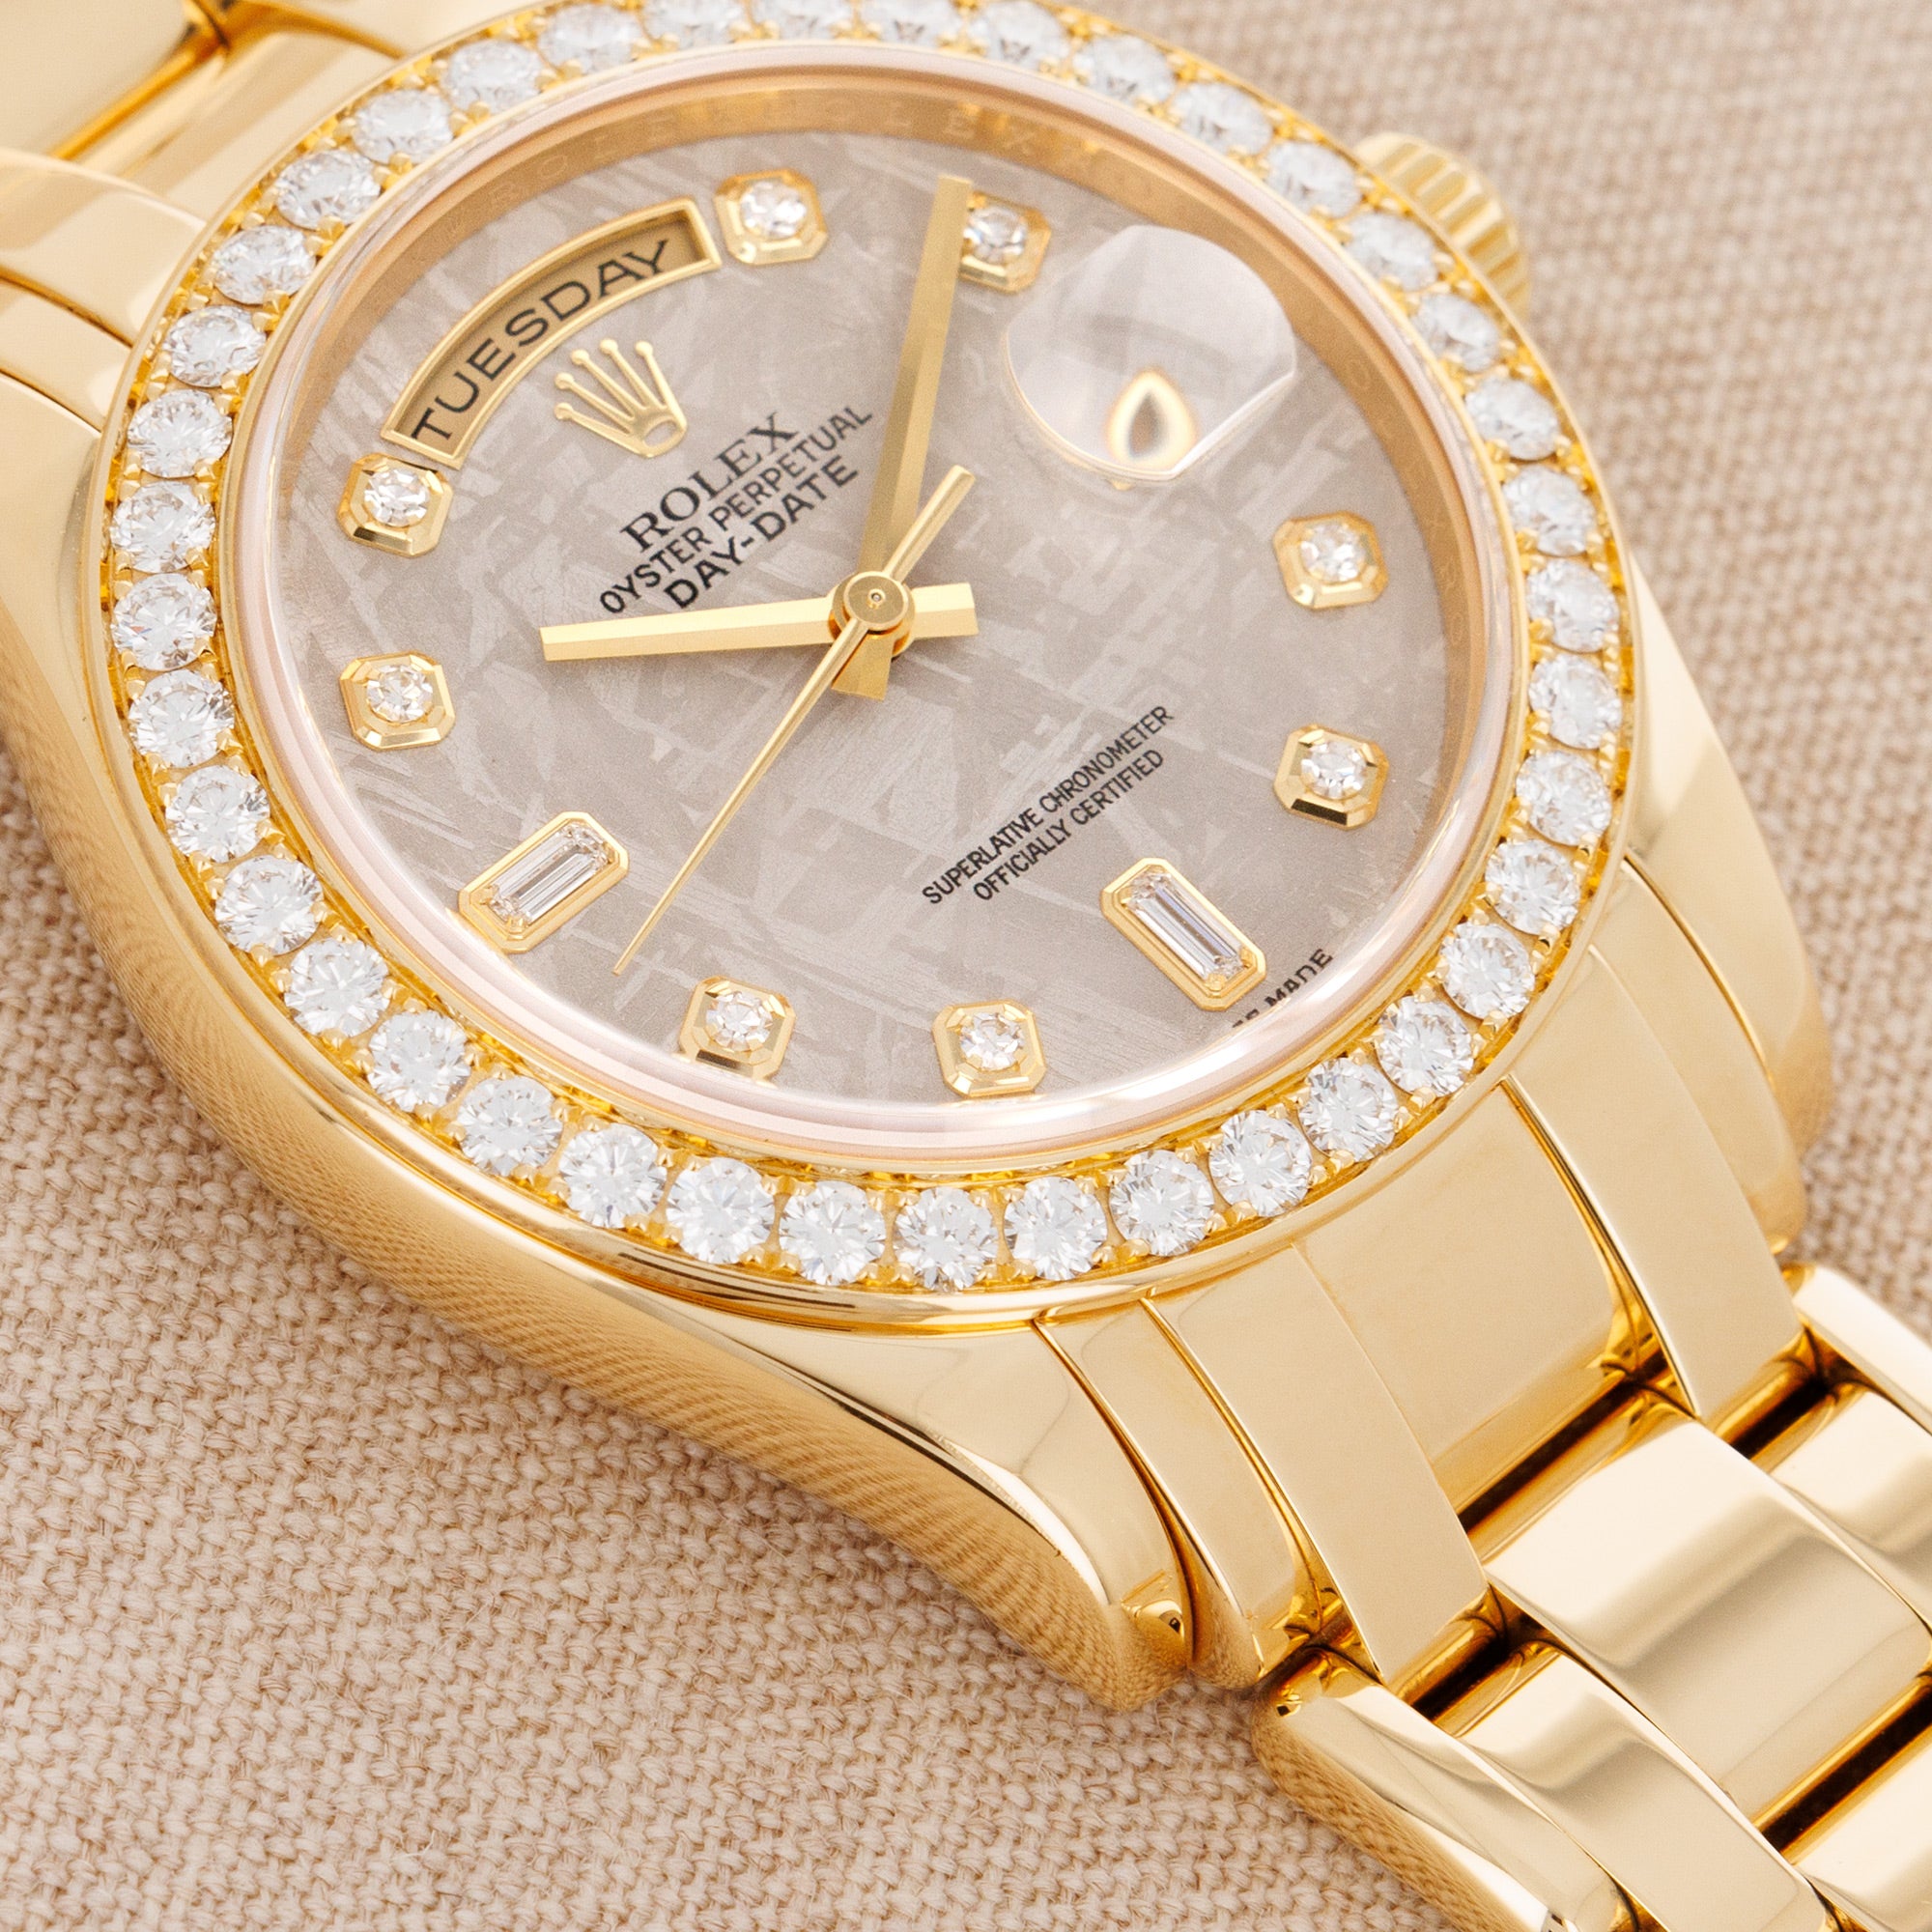 Rolex - Rolex Yellow Gold Masterpiece Ref. 18948 with Meteorite Dial - The Keystone Watches